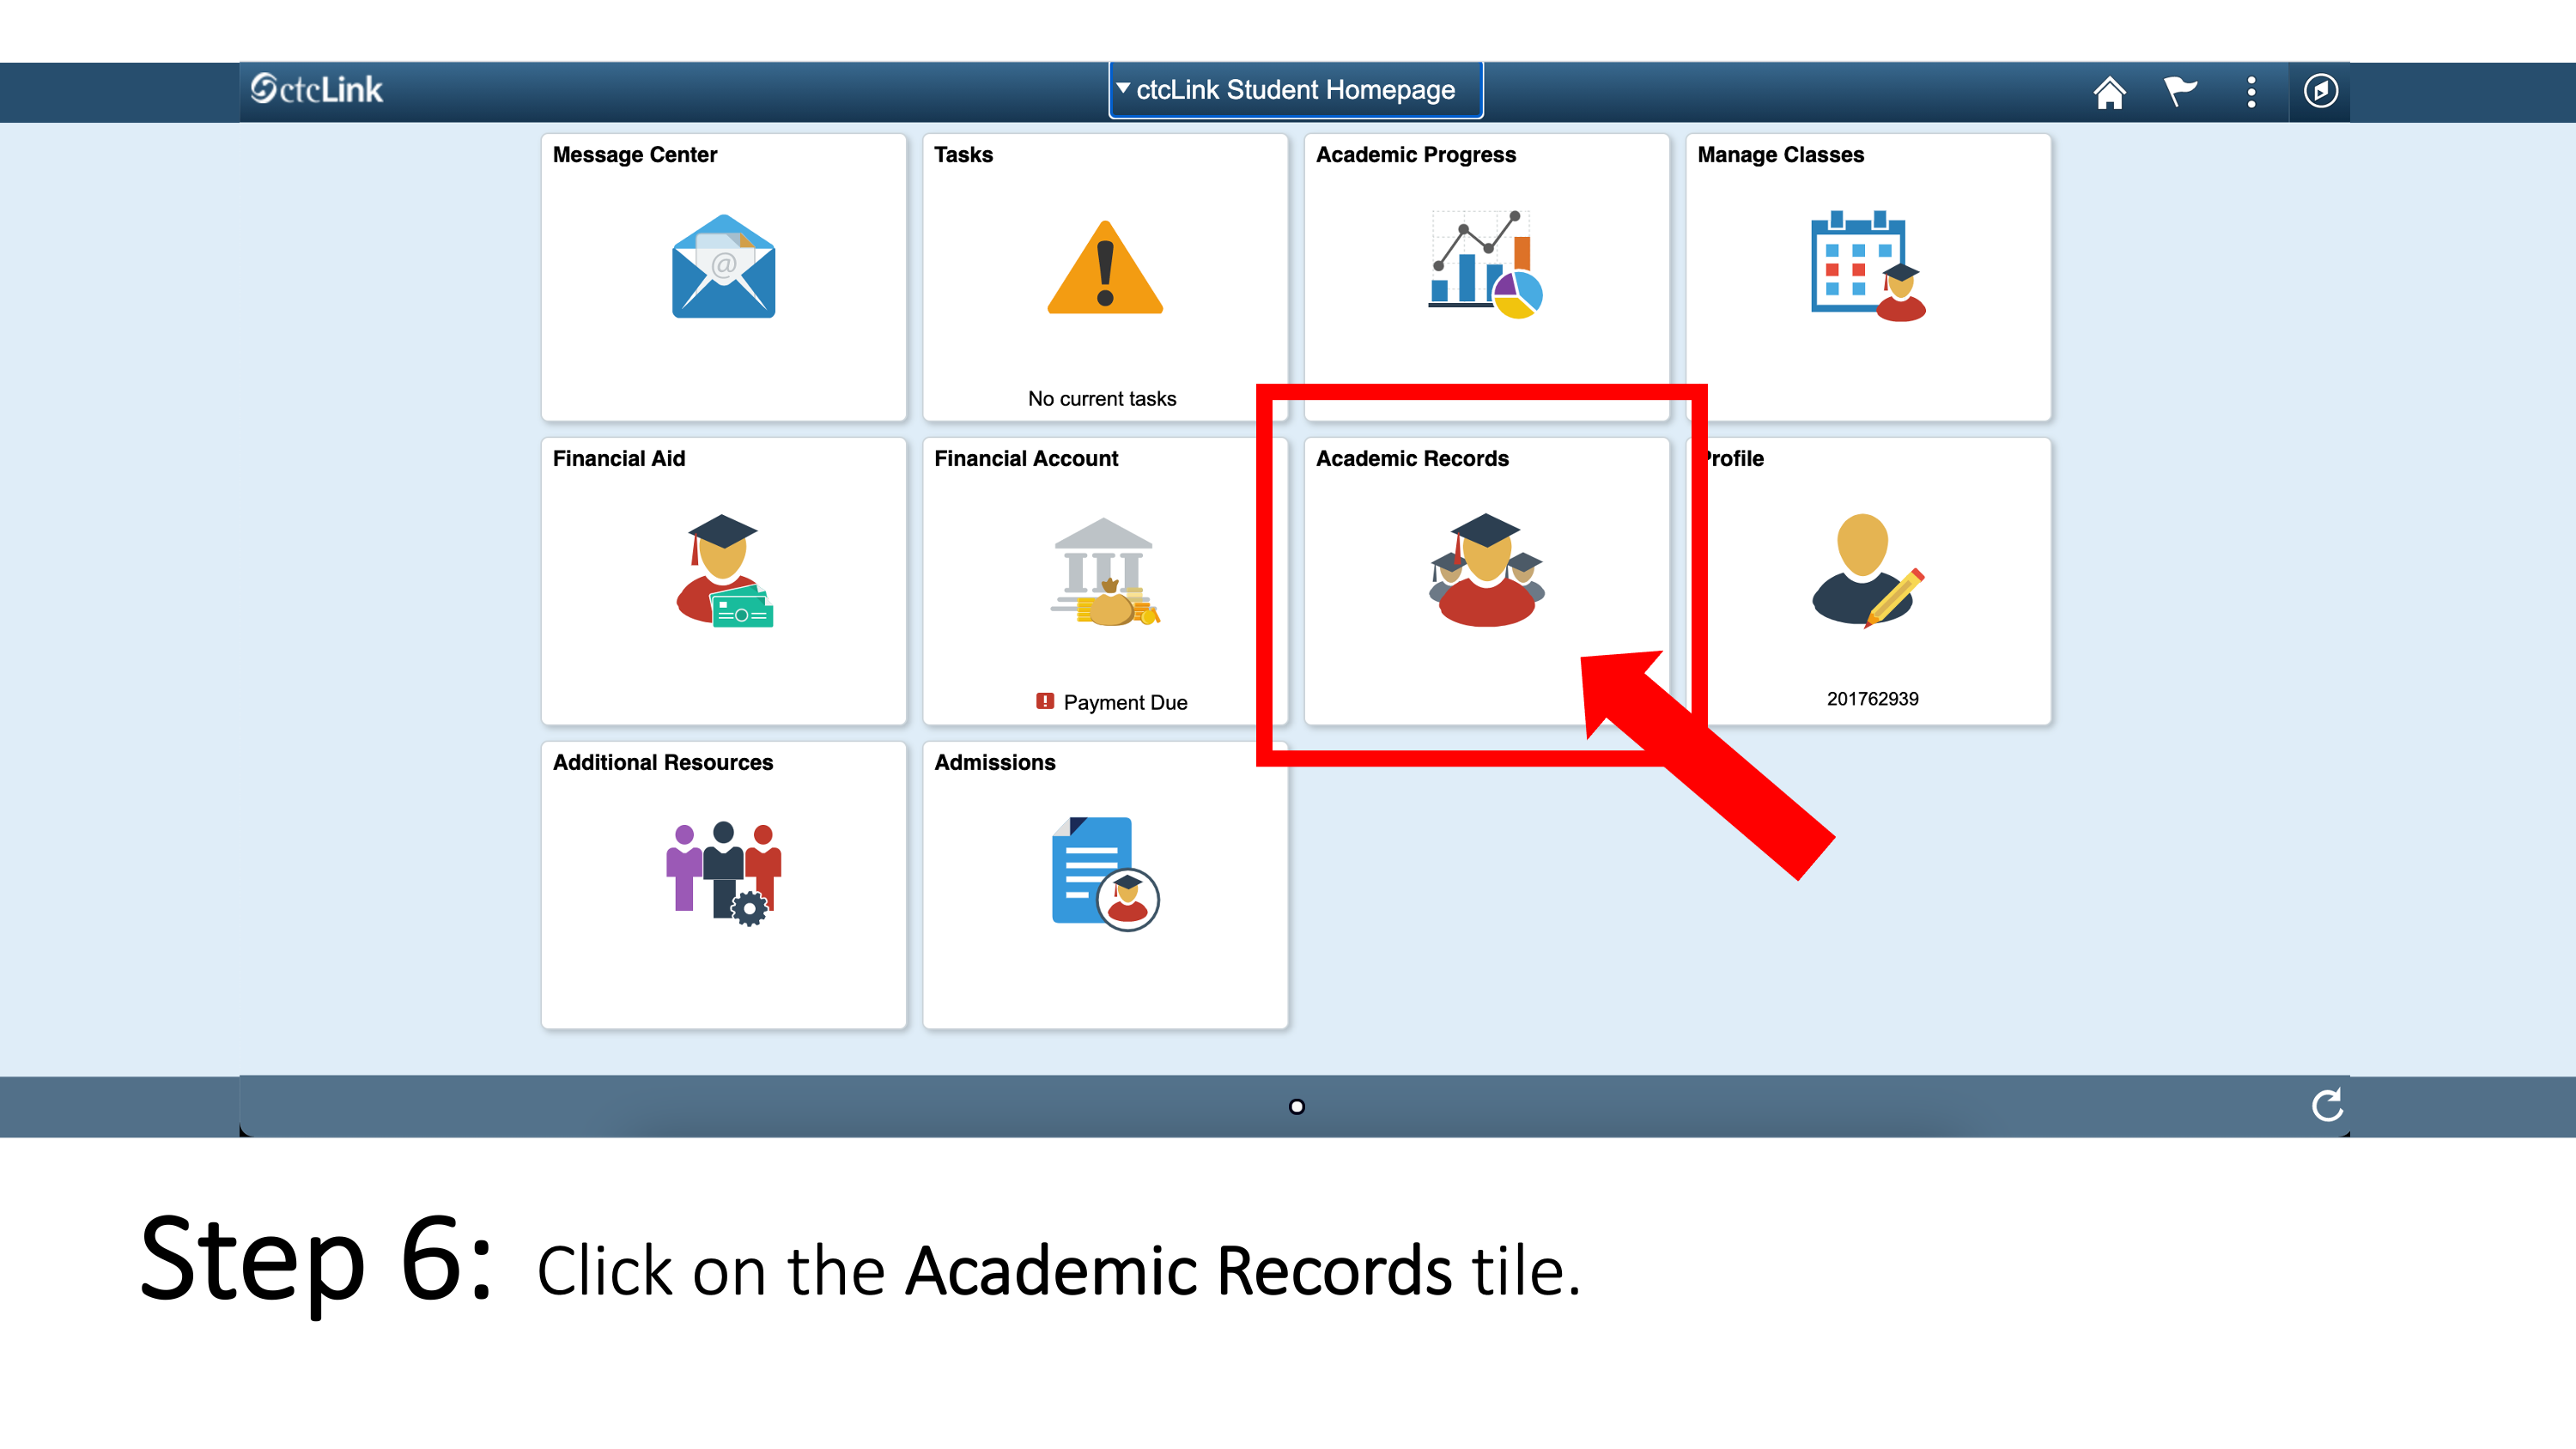 Click on the Academic Records tile